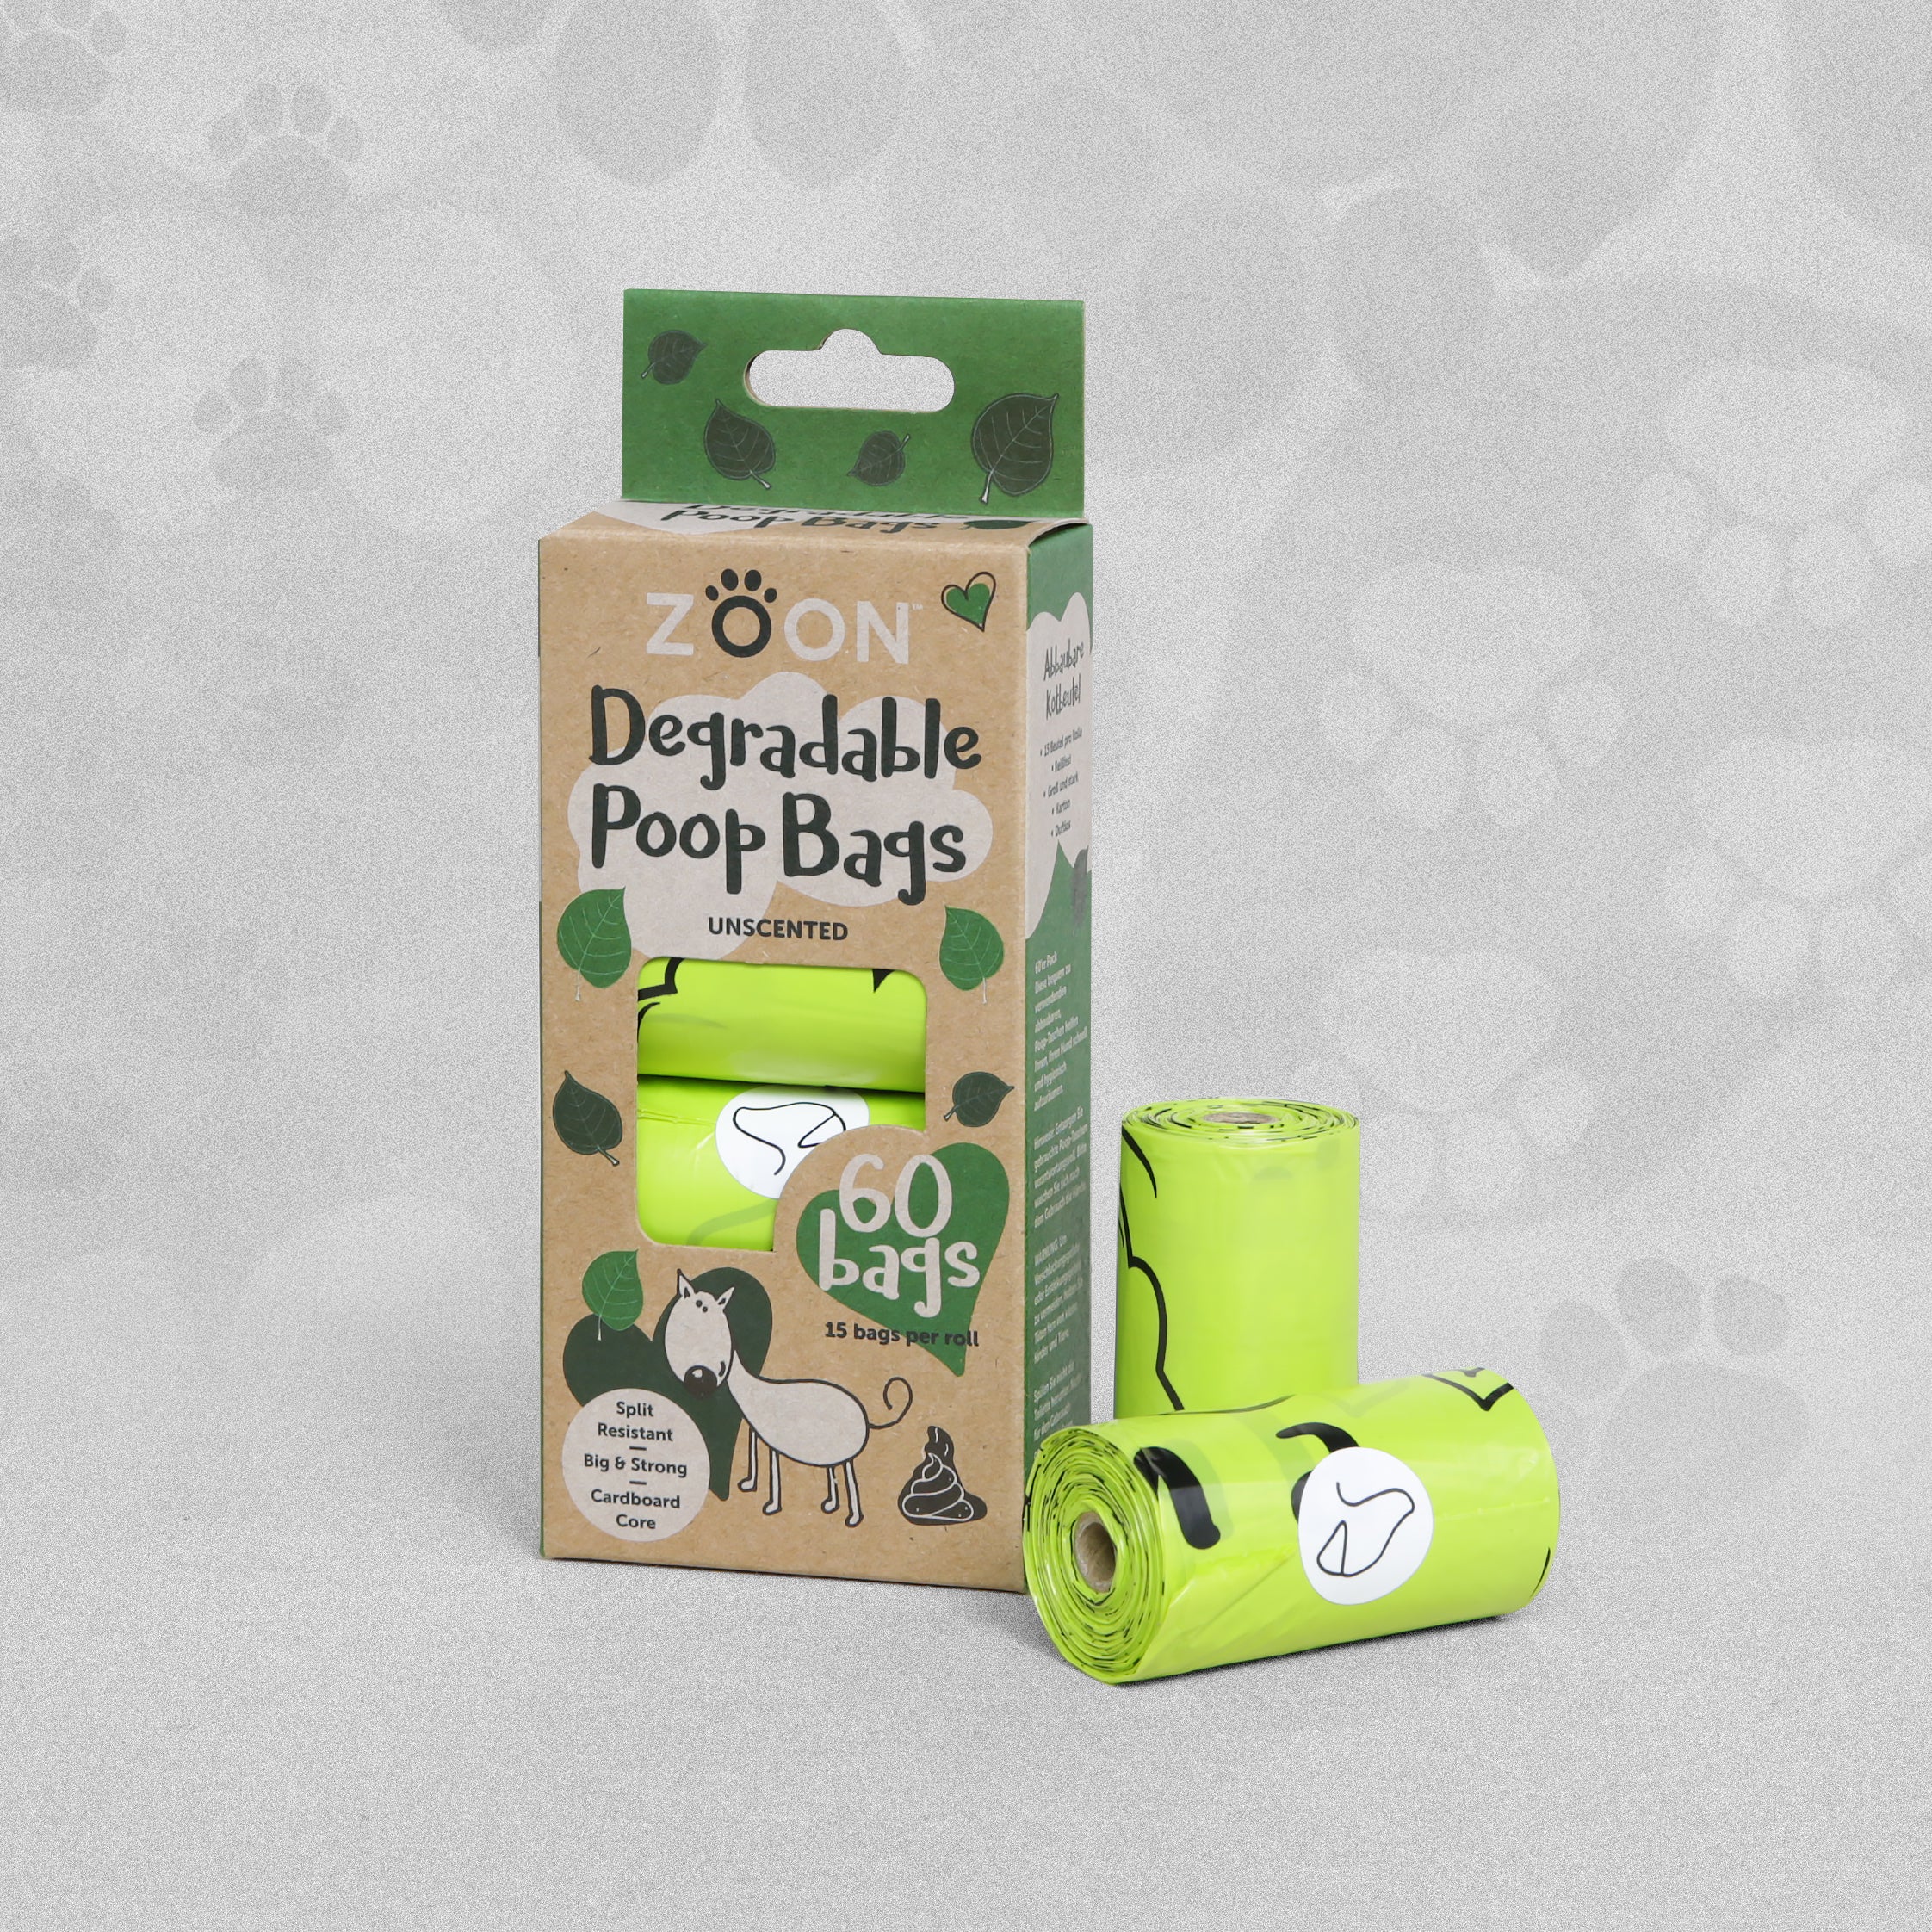 Zoon Degradable Poop Bags - Unscented